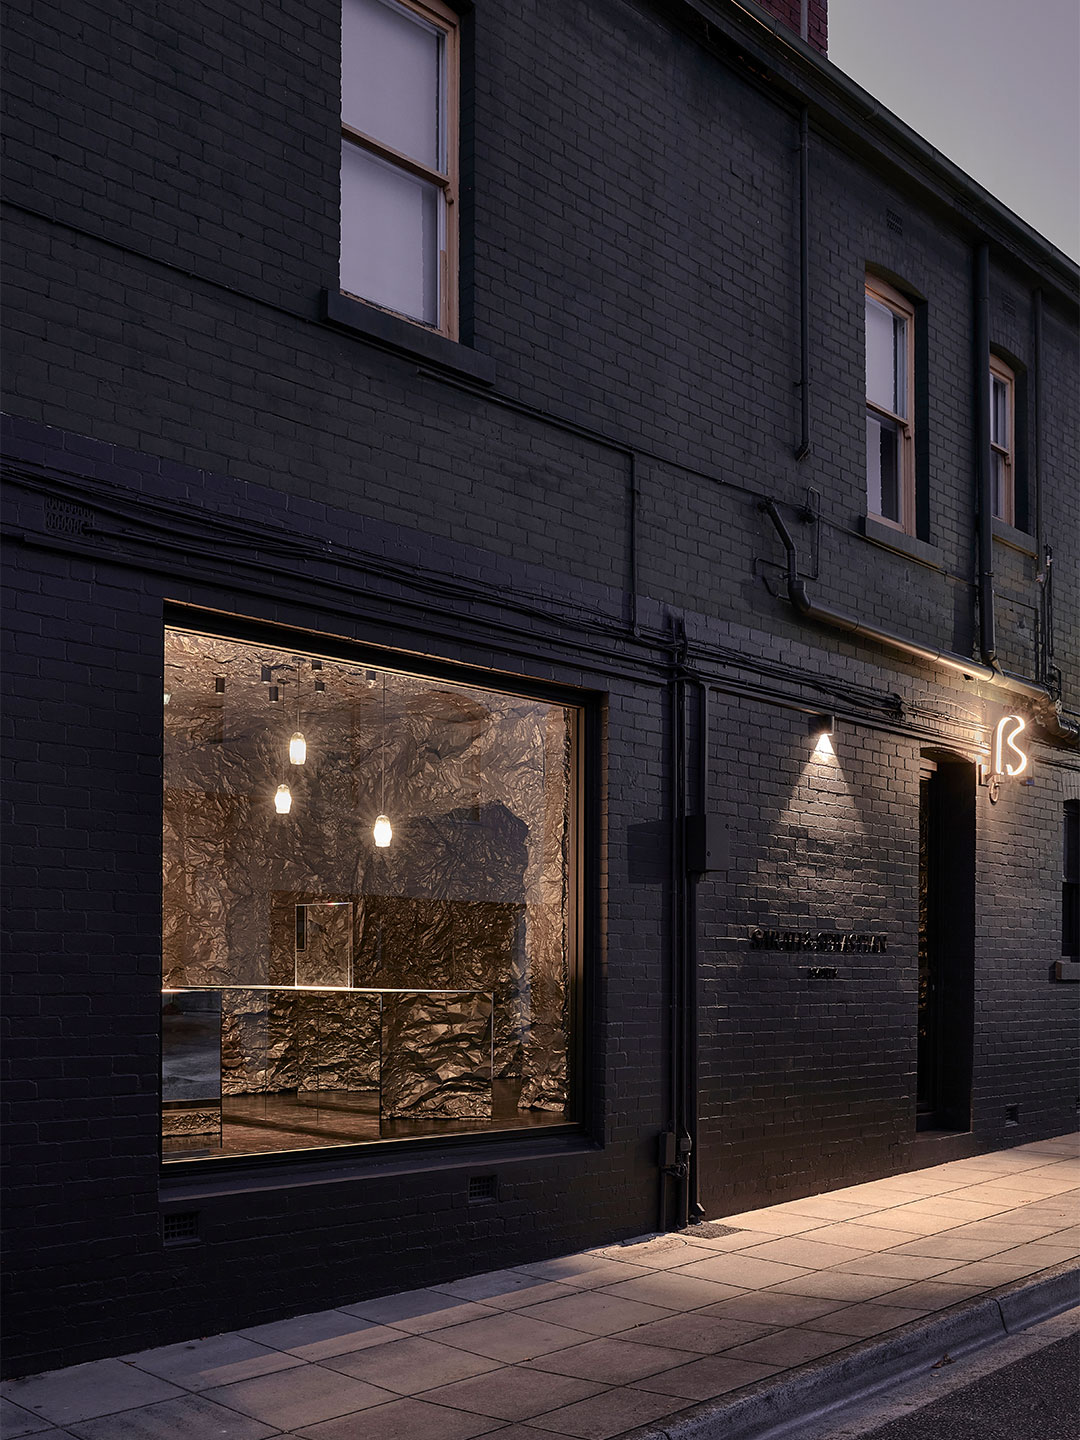 The Melbourne boutique belonging to jewellery brand Sarah & Sebastian was designed by architects Russell & George. 